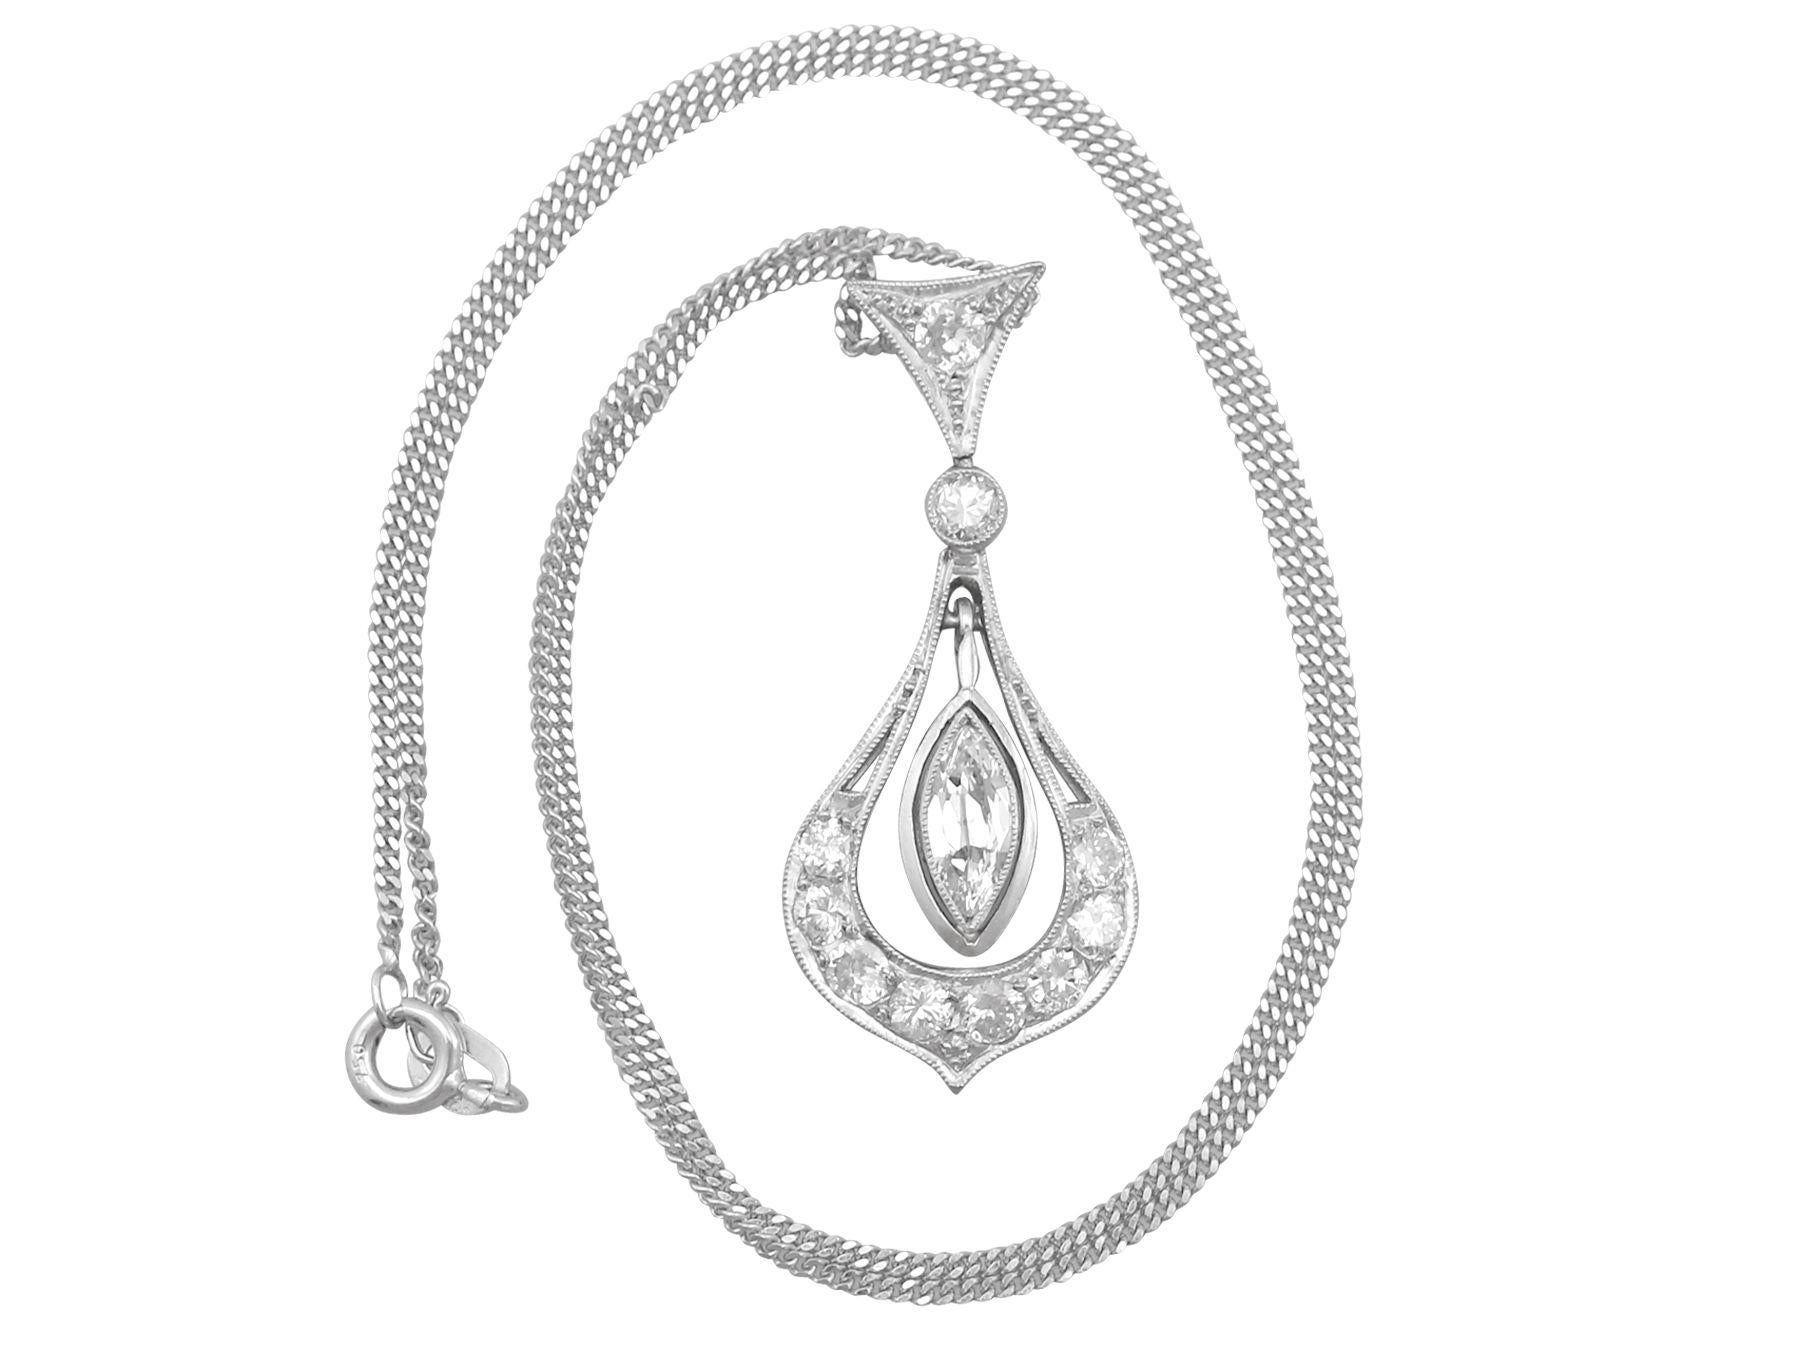 An impressive antique 1930s 0.87 carat diamond and platinum pendant; part of our diverse antique jewelry and estate jewelry collections.

This fine and impressive antique diamond pendant has been crafted in platinum.

The pierced decorated, pear